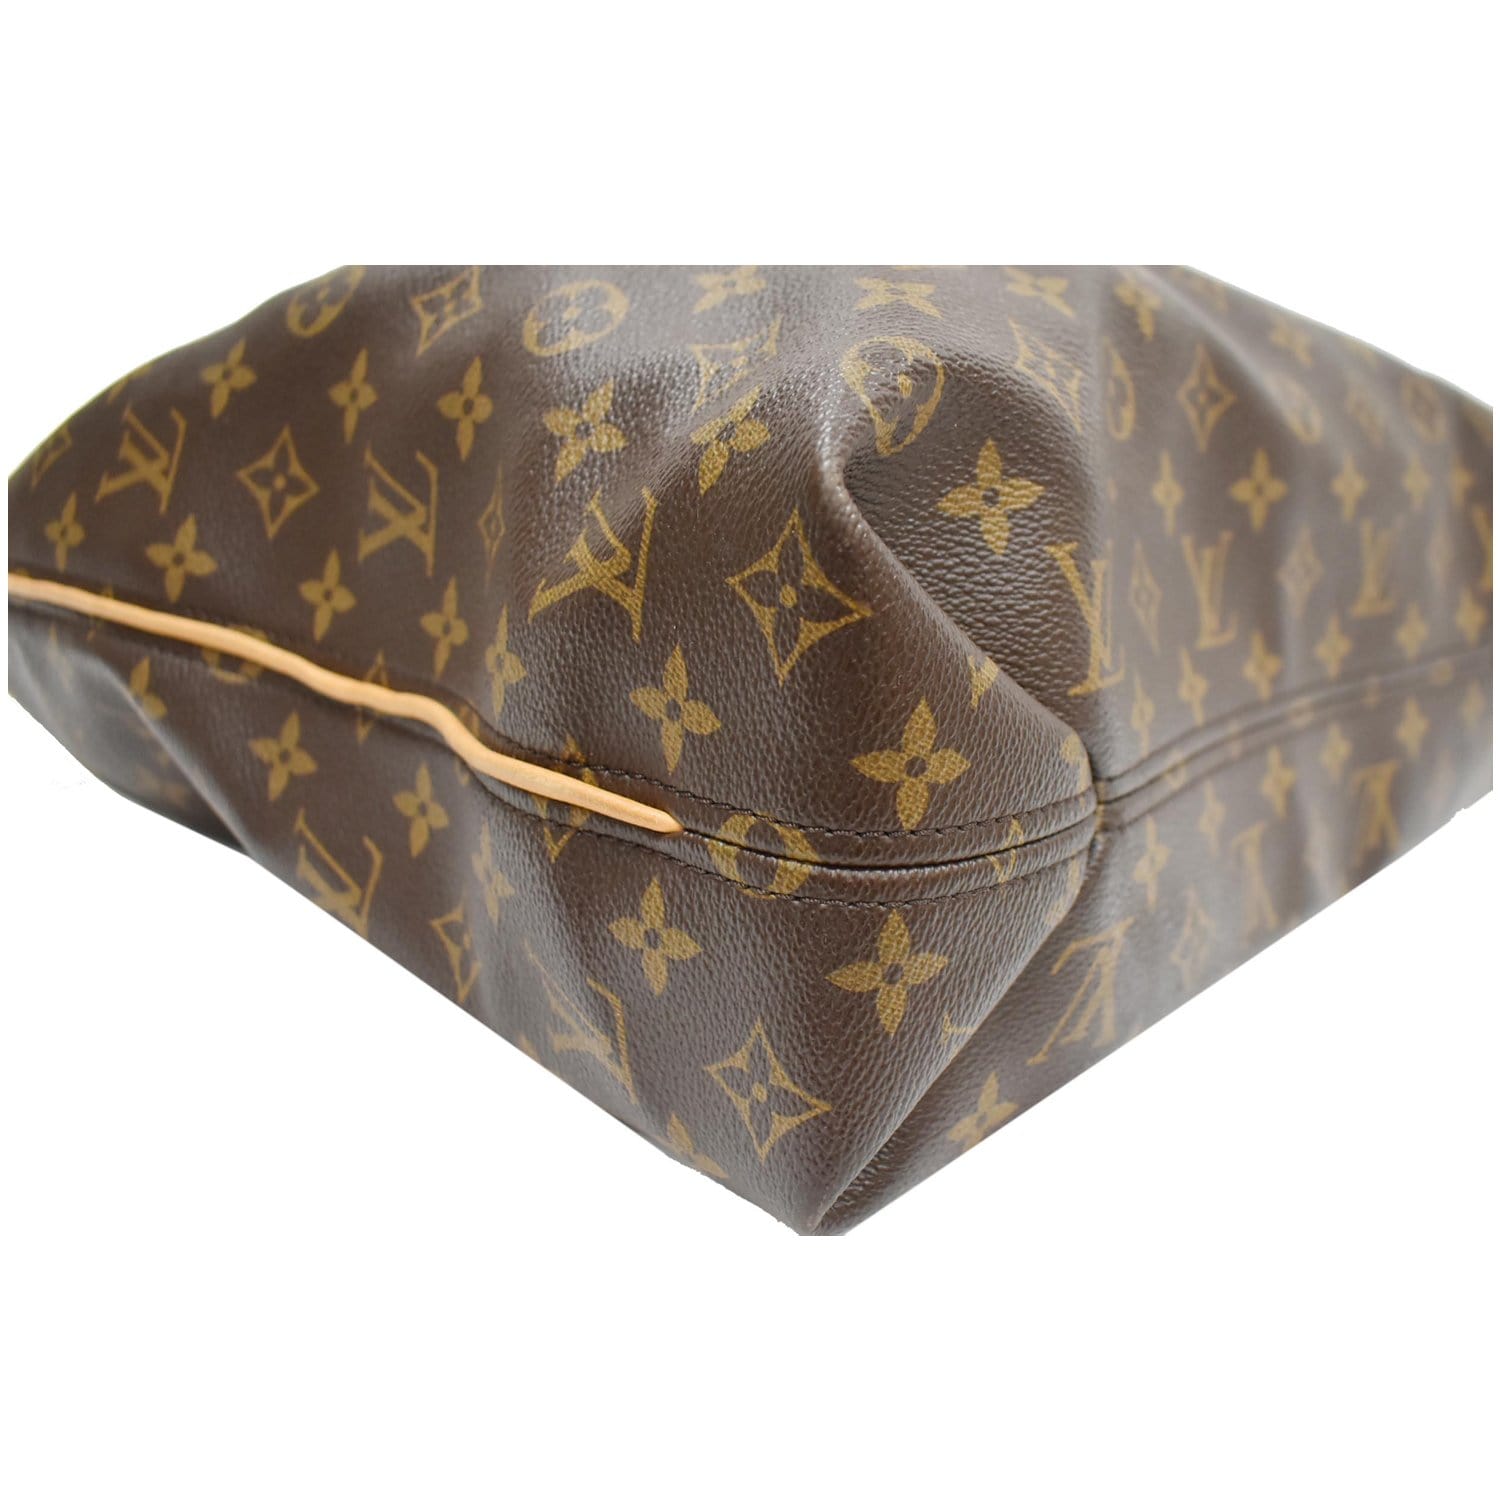 How to Spot an Authentic Louis Vuitton Sully MM Shoulder Bag